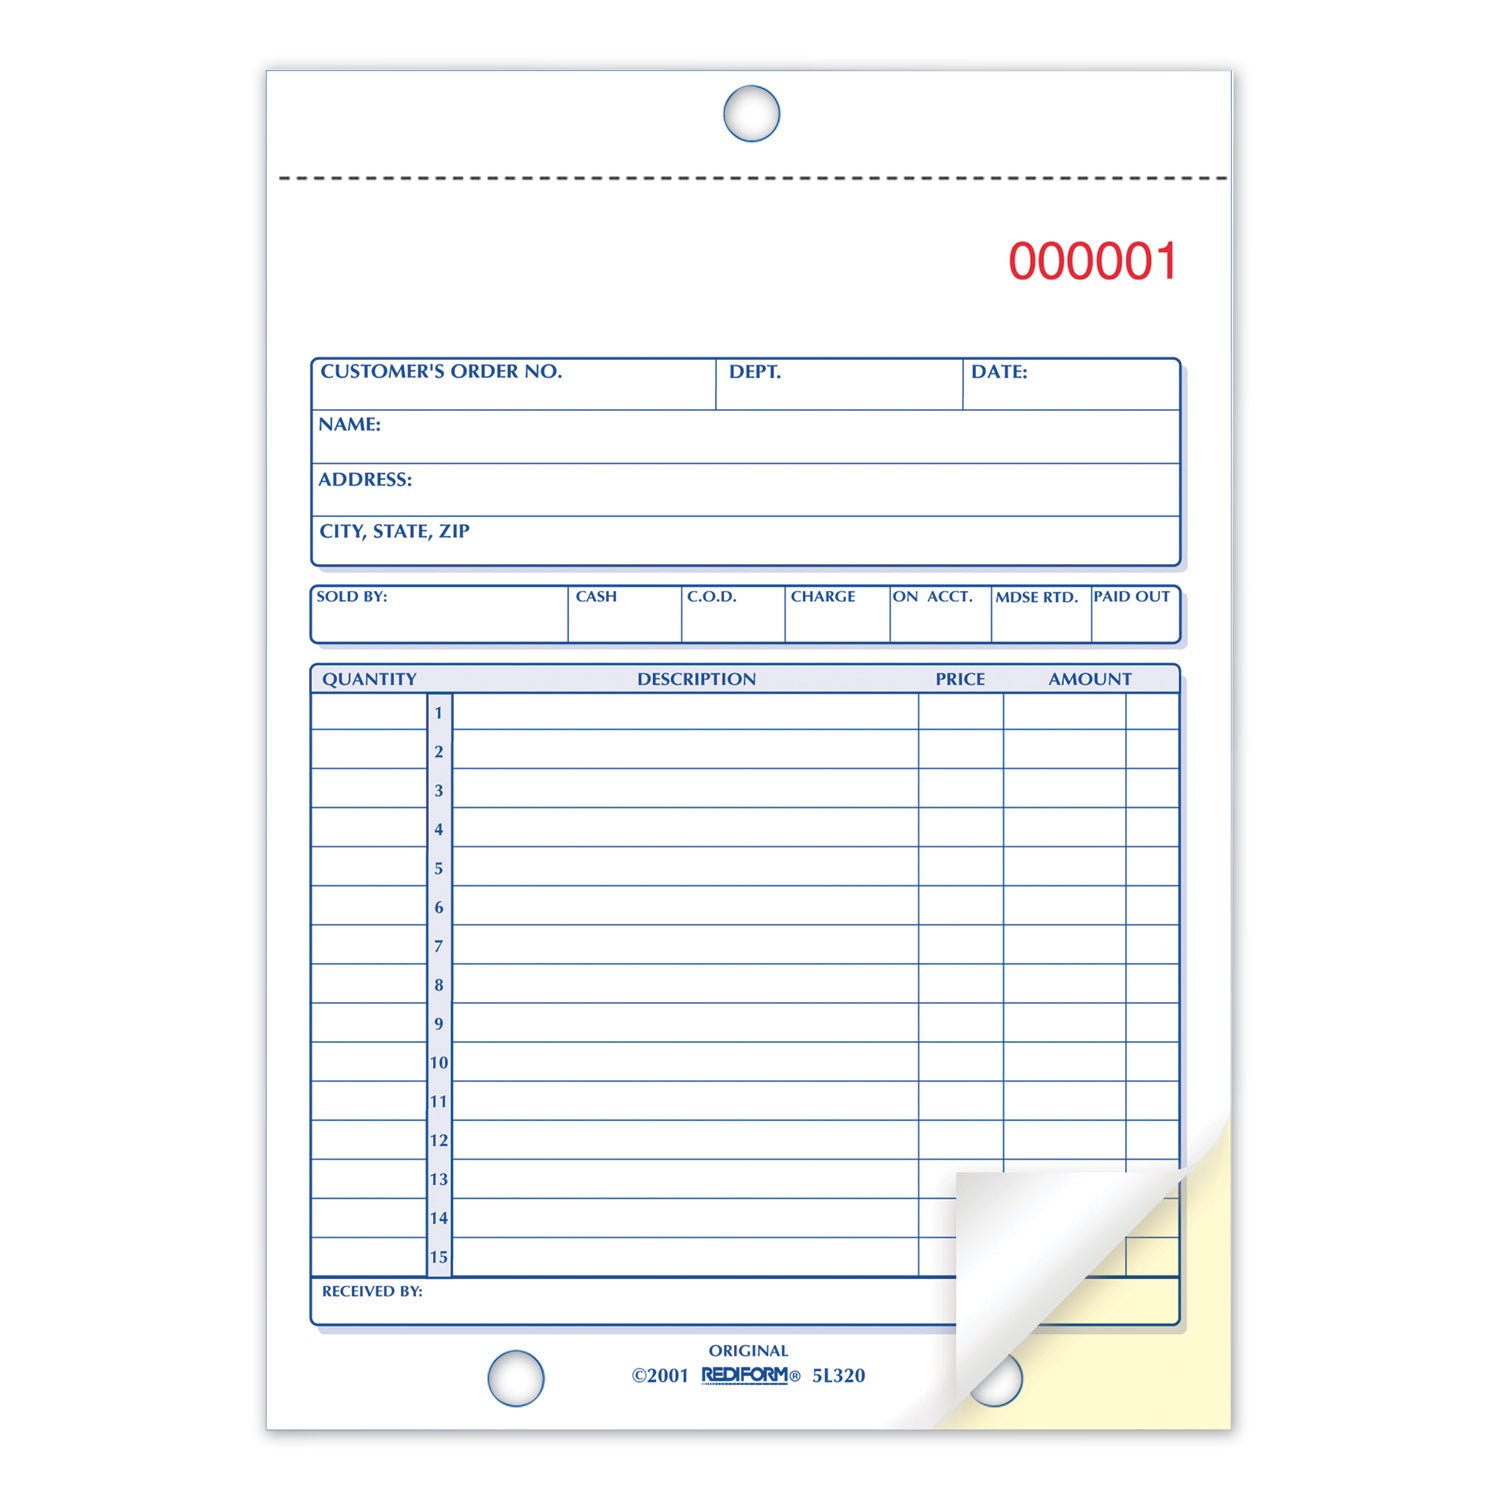 Sales Book, 15 Lines, Two-Part Carbonless, 5.5 x 7.88, 50 Forms Total - 